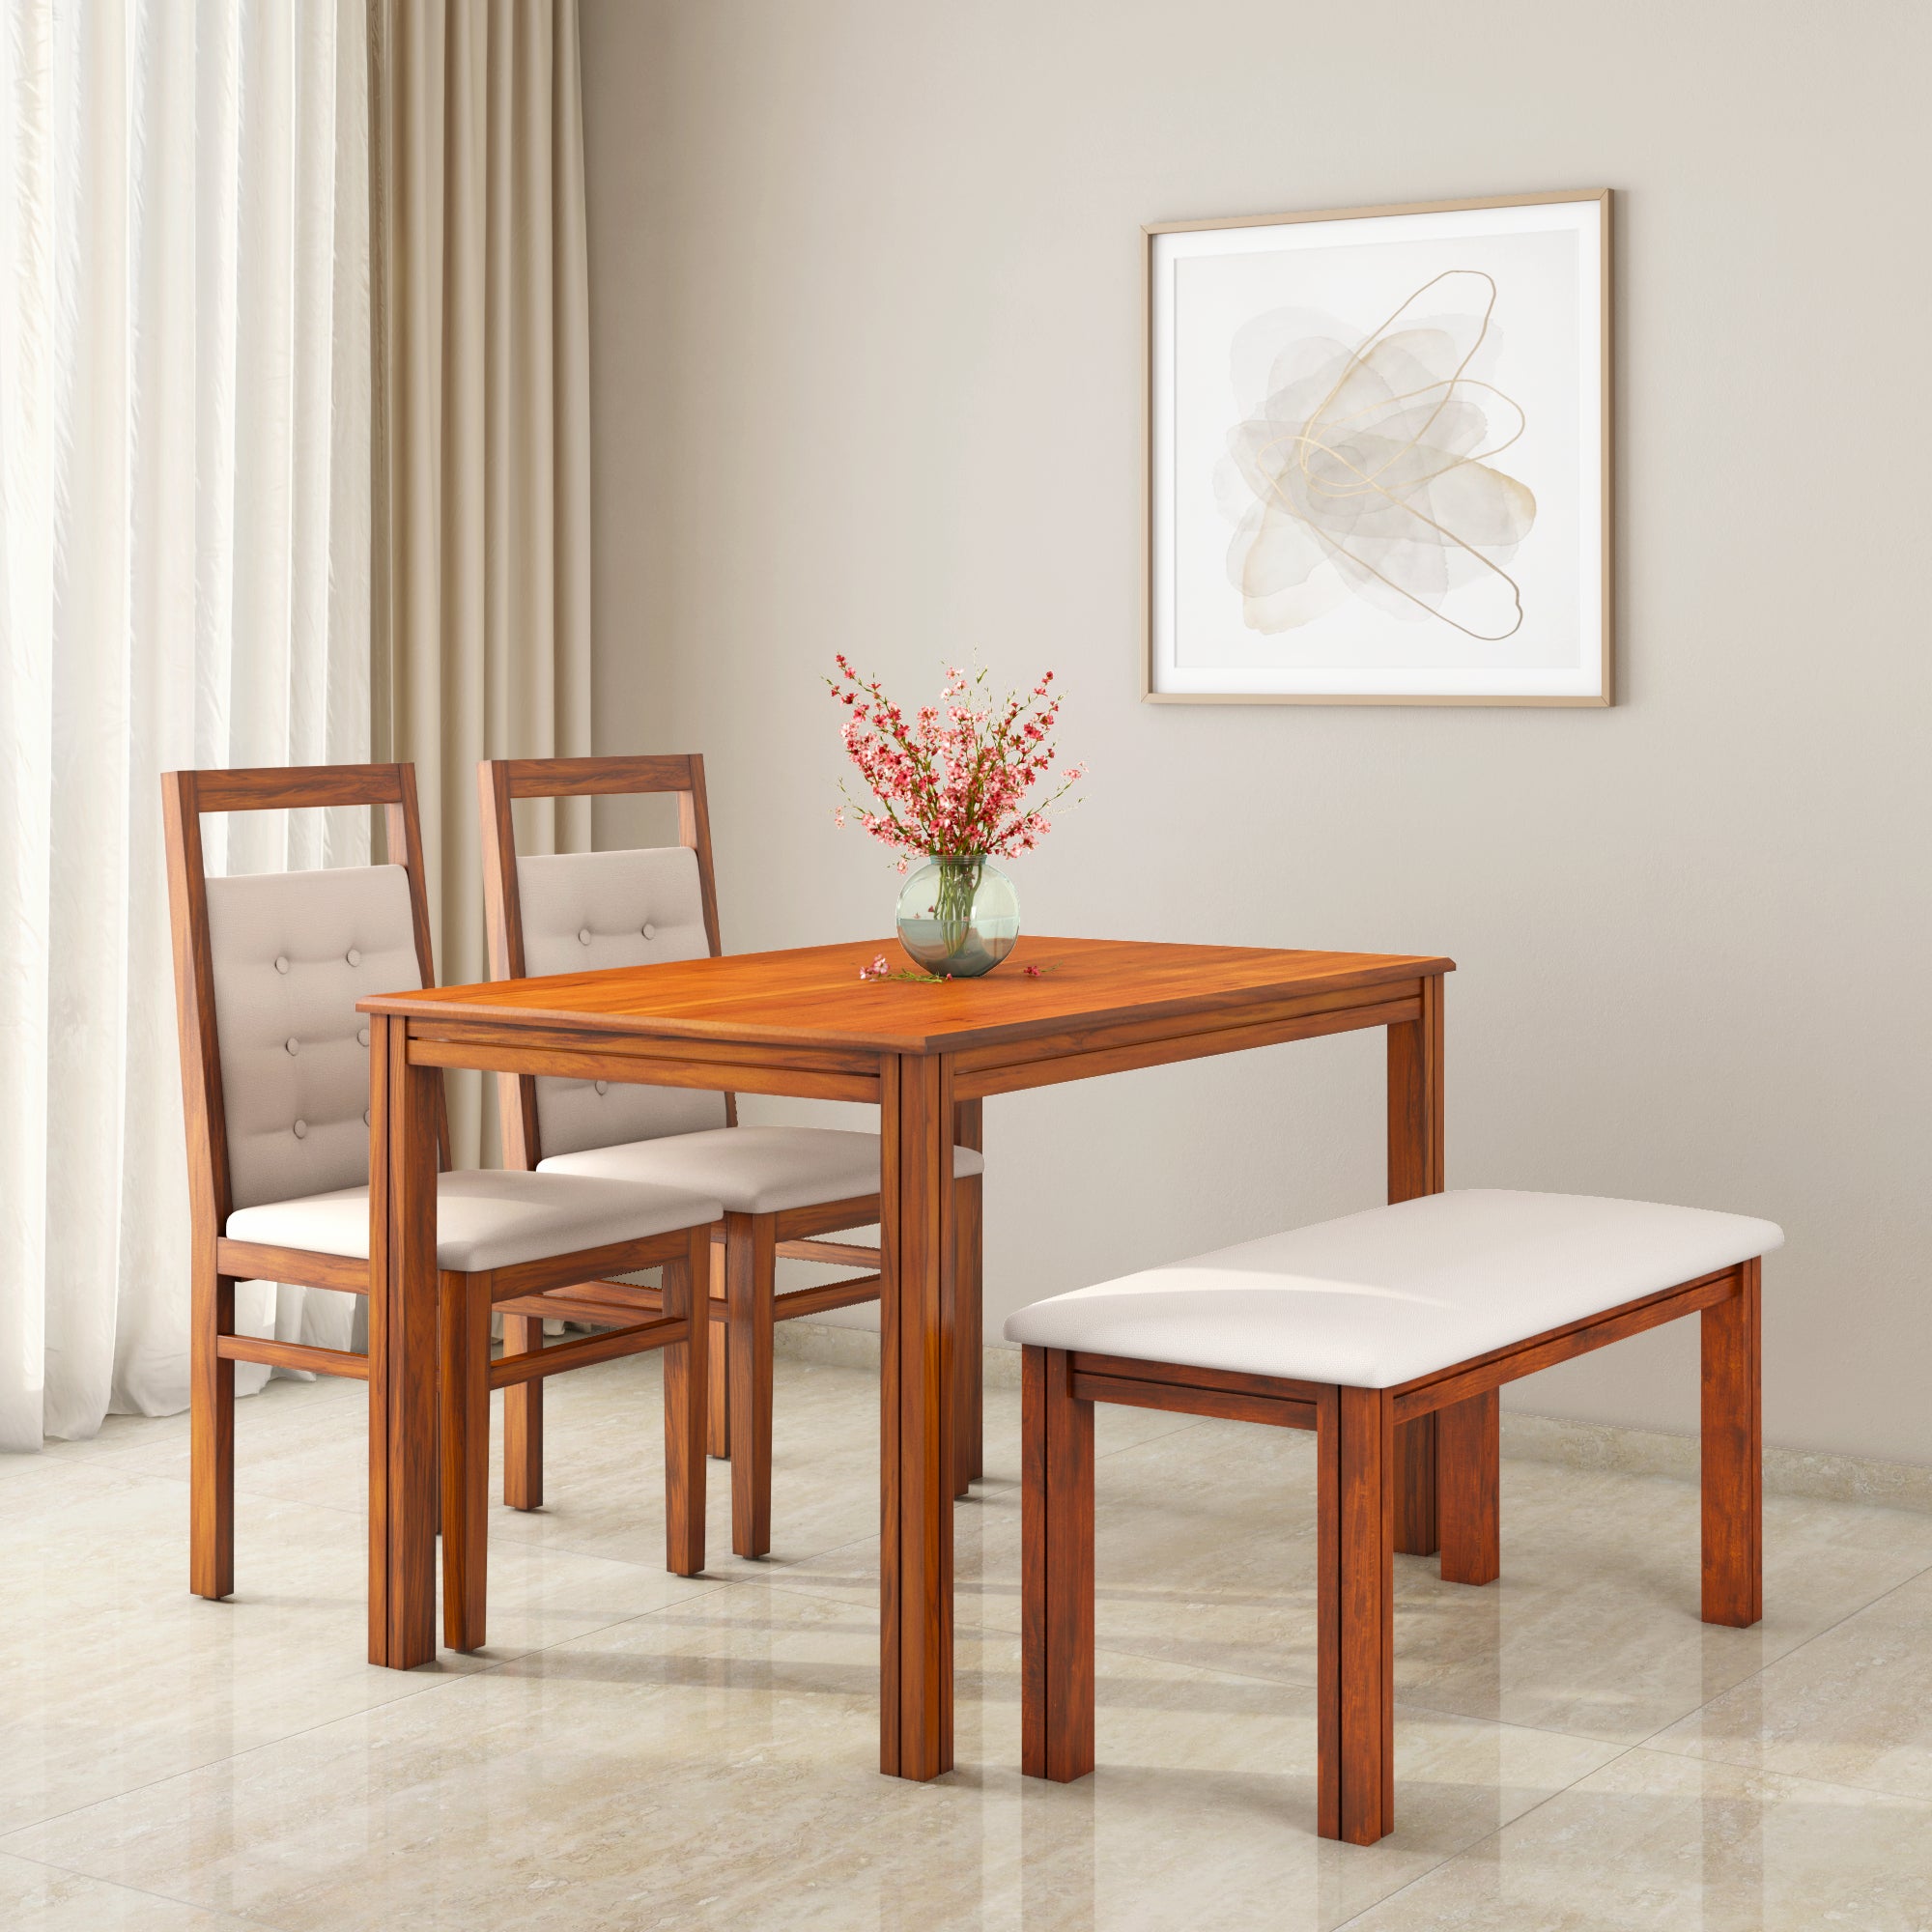 Vera 4 Seater Solid Wood Dining Set With Bench in Honey Brown Finish